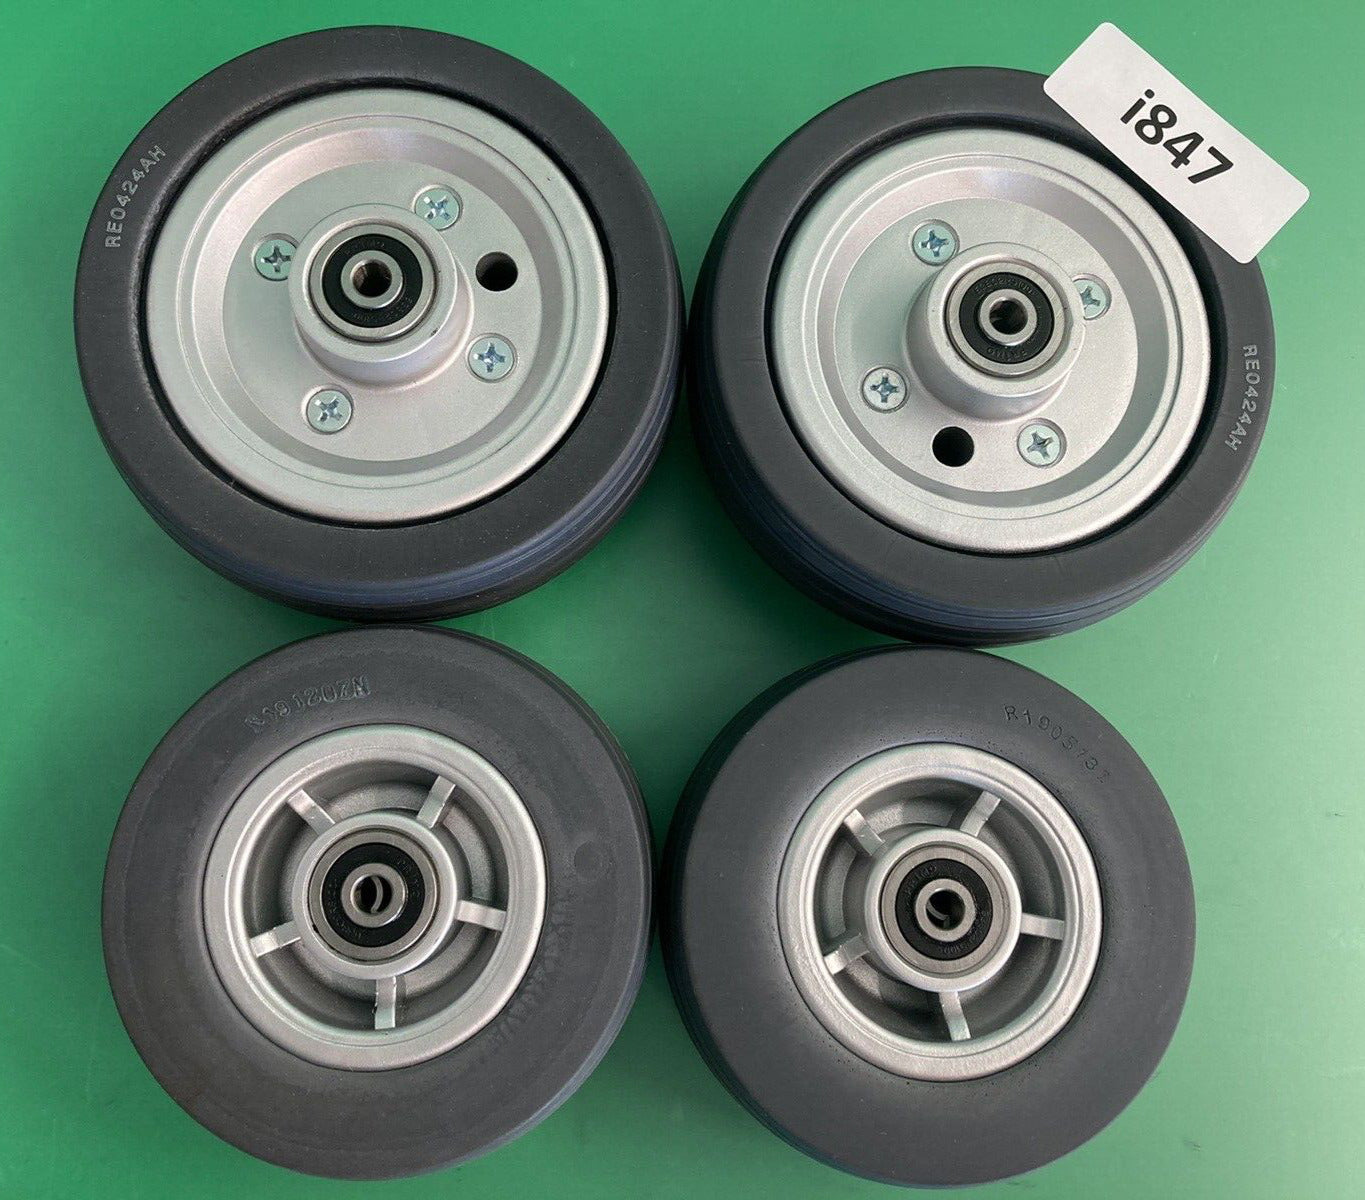 5" Front & 6" Rear Caster Wheels for Pride J6 / Quantum J6 Wheelchairs #i847